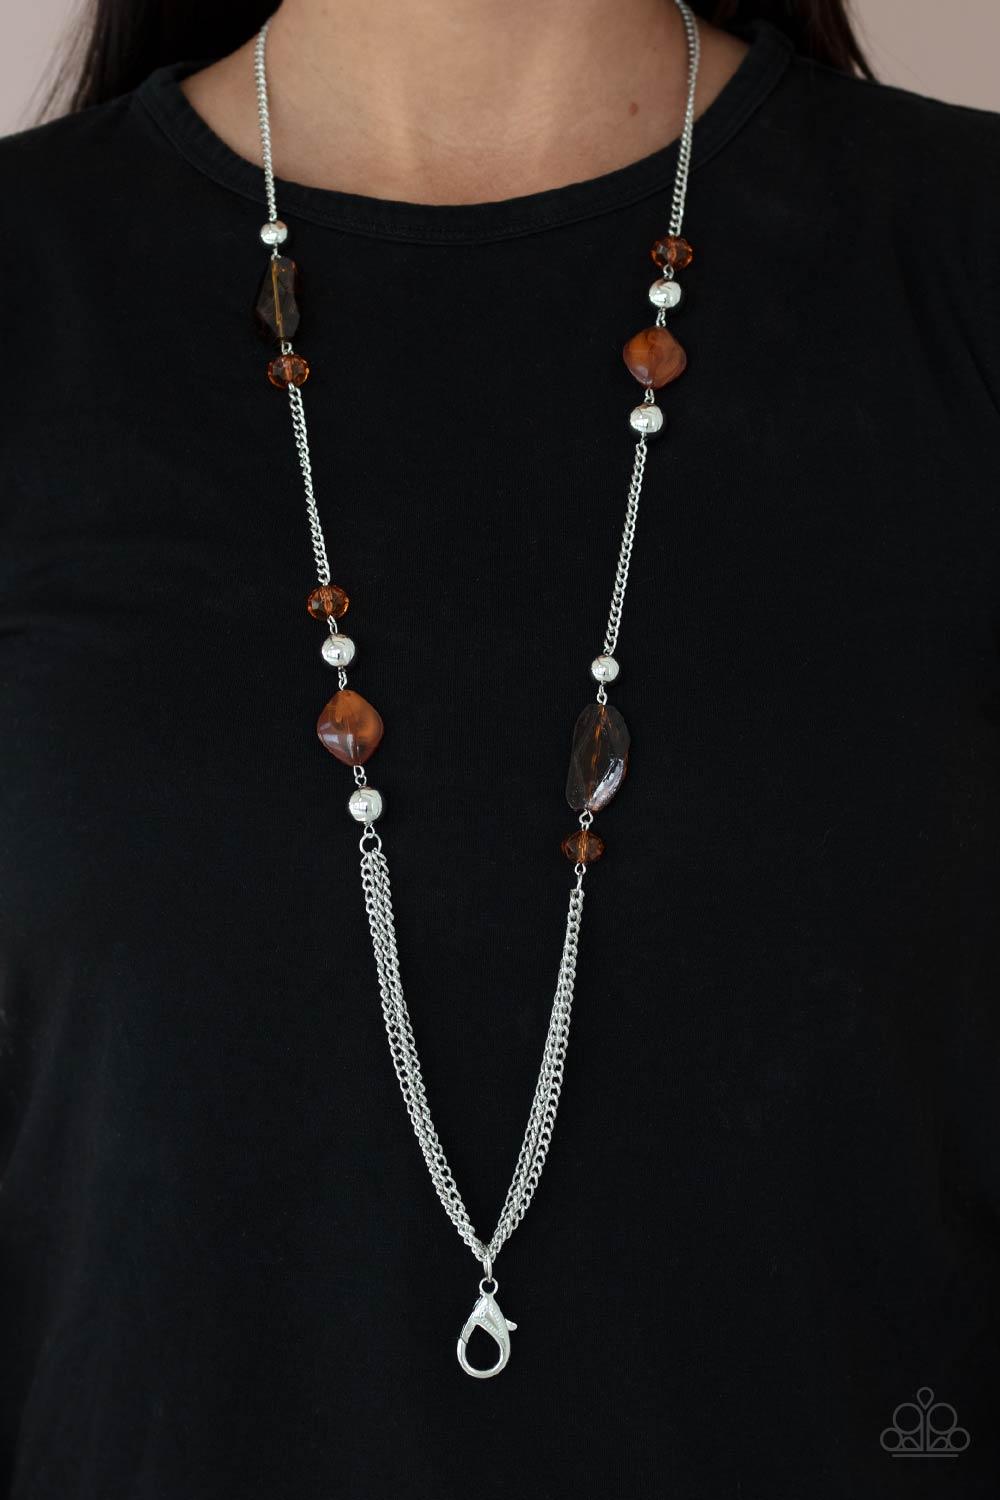 Spectacularly Speckled Brown Necklace - Jewelry By Bretta